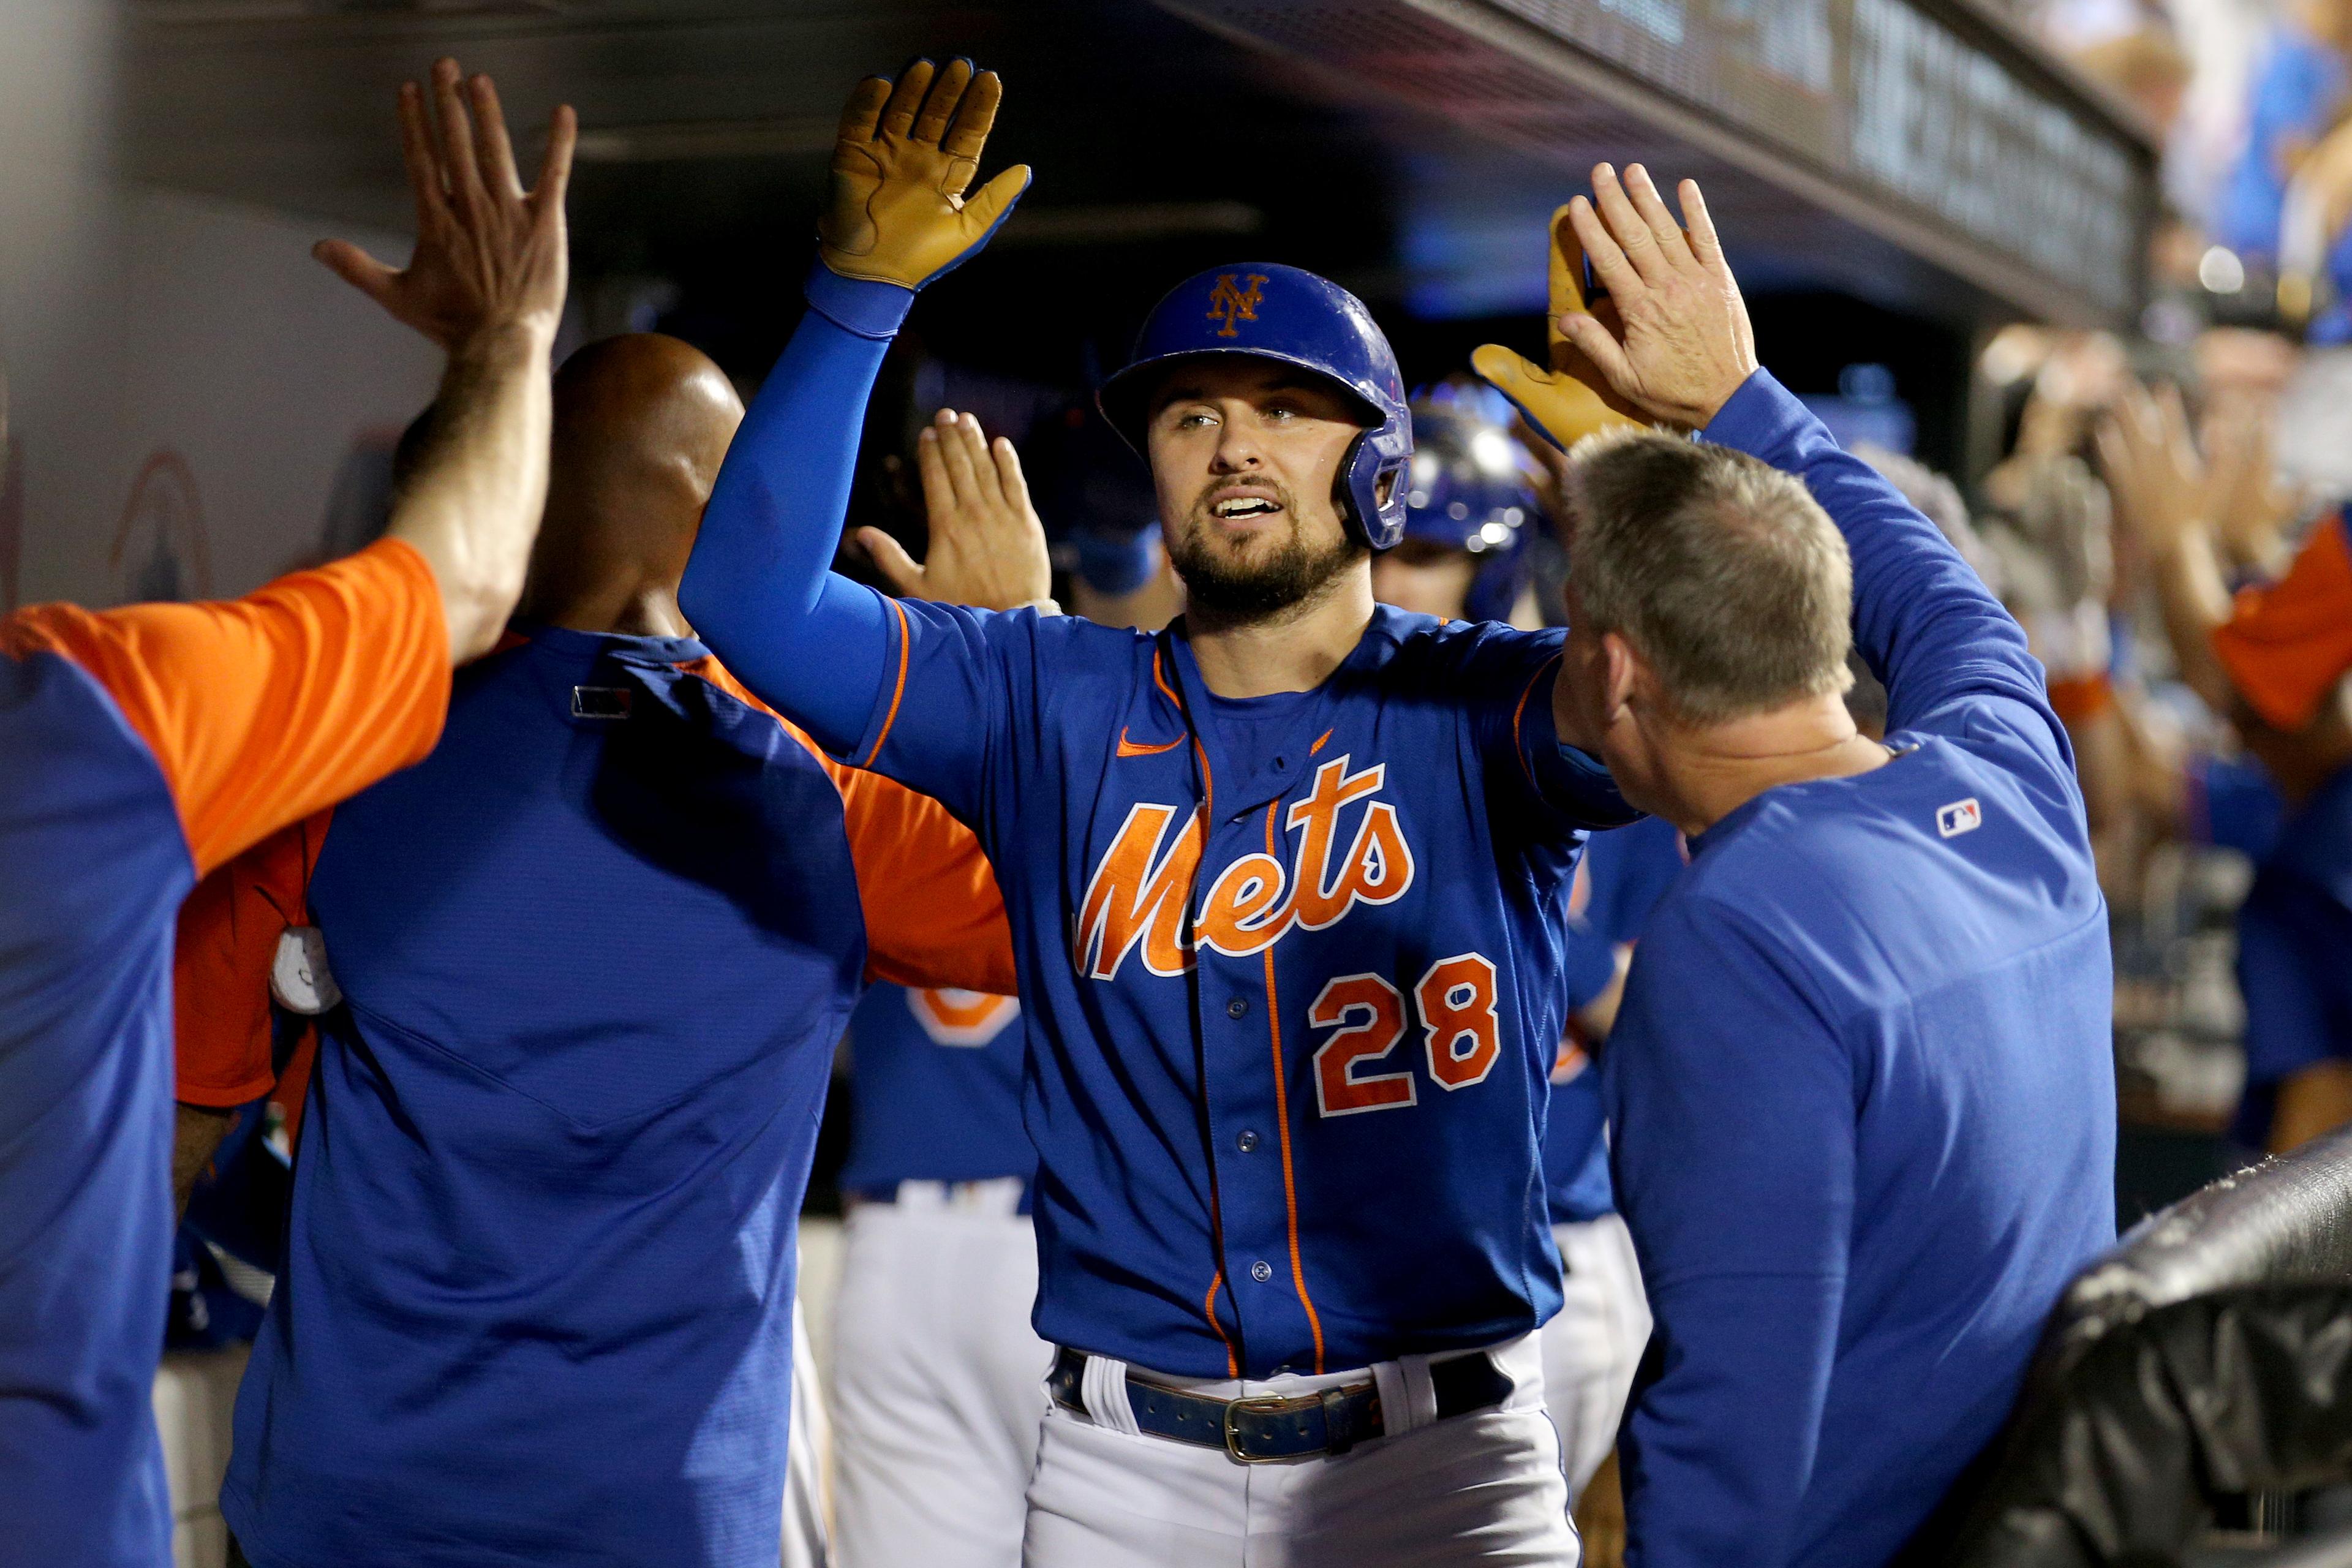 New York Mets designated hitter J.D. Davis (28) celebrates his grand slam against the Miami Marlins in the dugout with teammates during the fifth inning at Citi Field. / Brad Penner-USA TODAY Sports